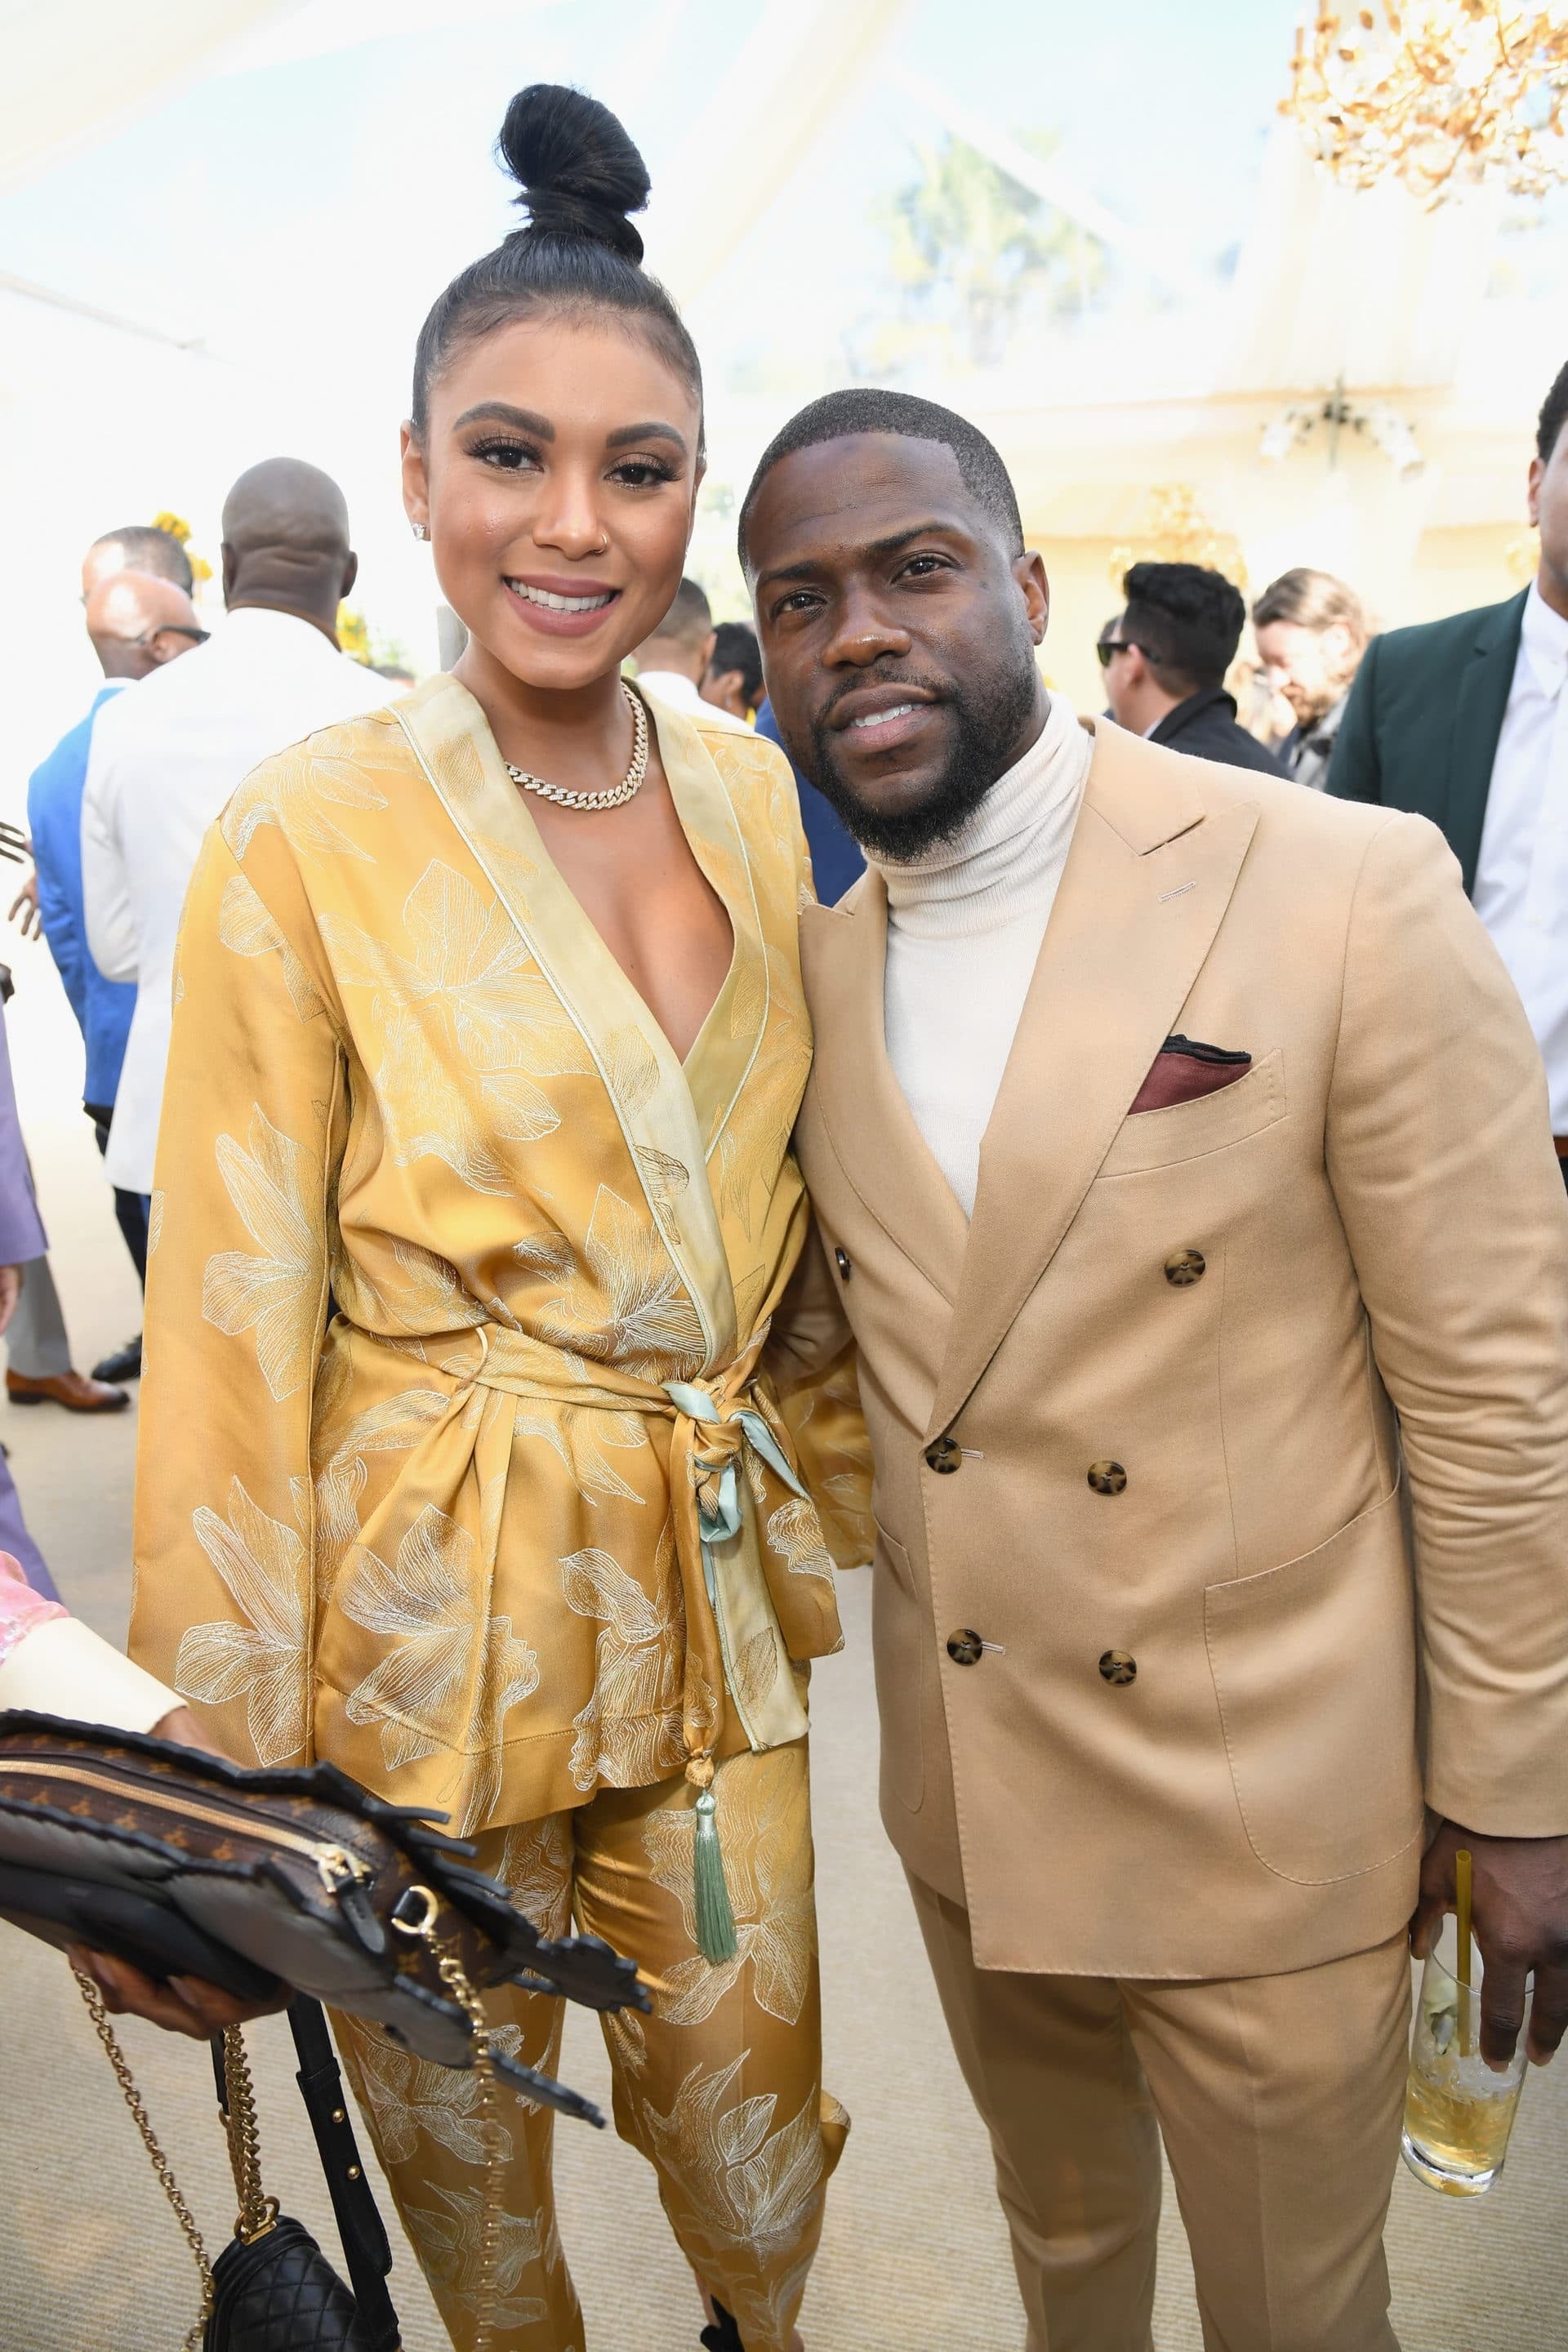 Per Usual, The Roc Nation Grammy Brunch Was An Unapologetic Celebration Of Black Excellence